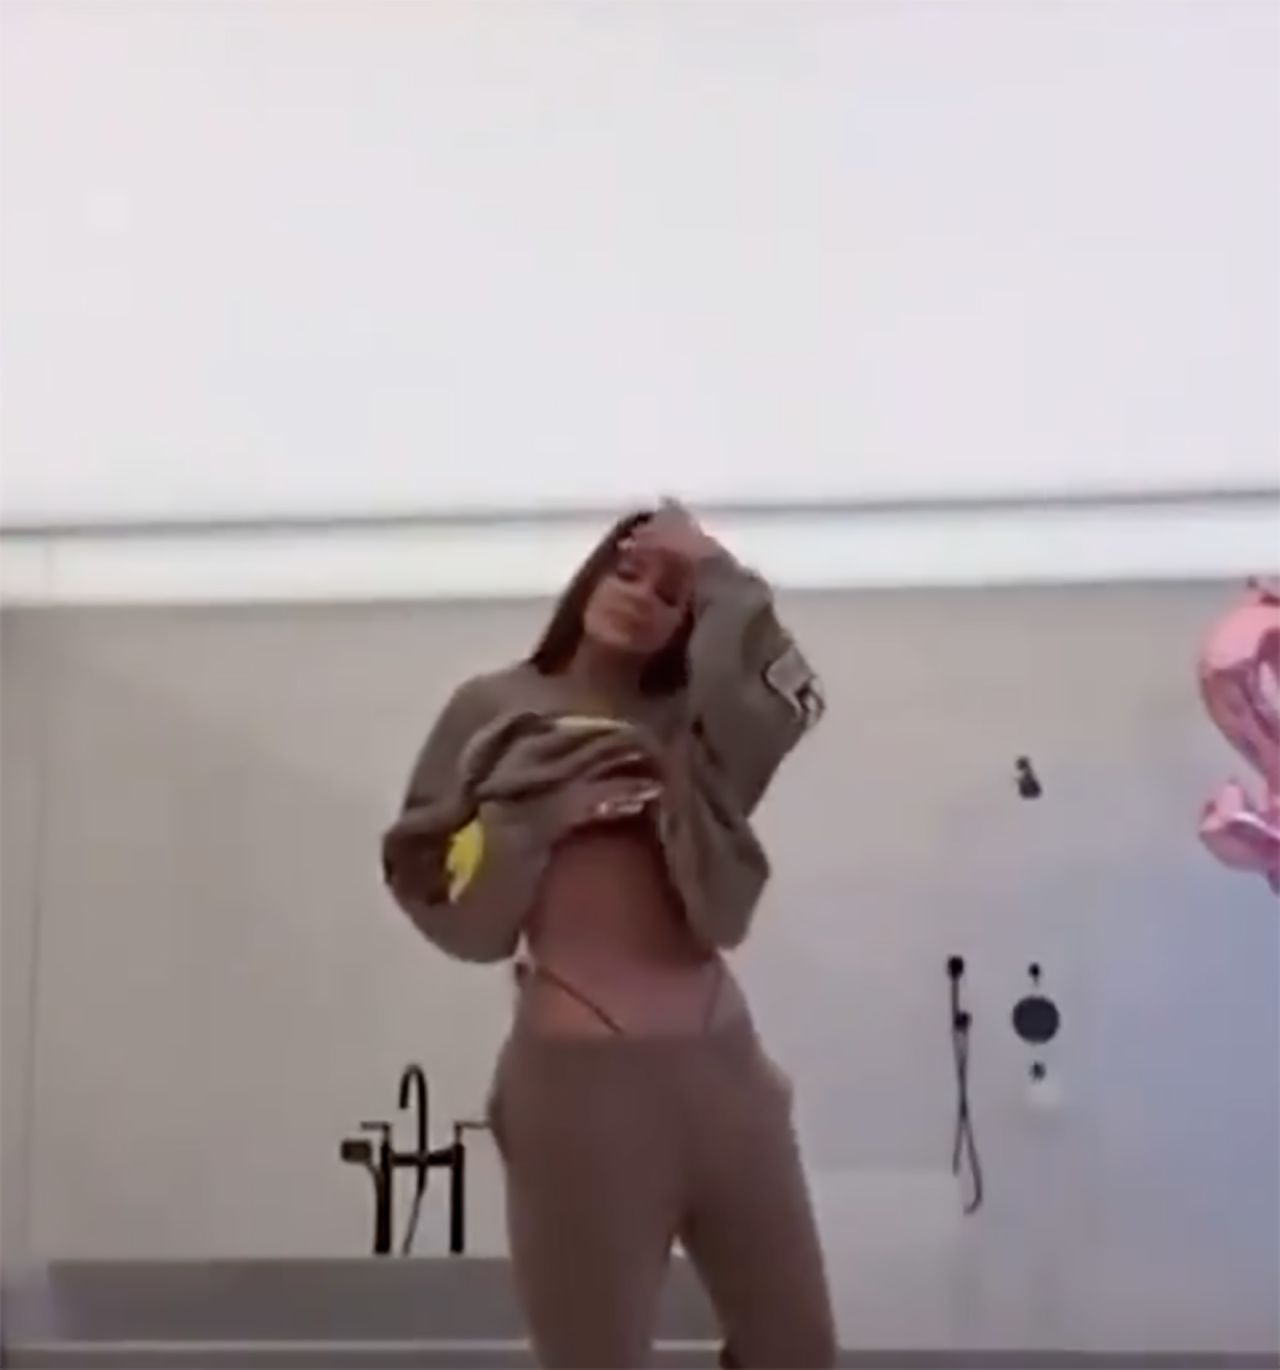 After trying to remove a photo of herself that was mistakenly posted to social media, Kardashian responded to internet comments with a video showing her unedited body.